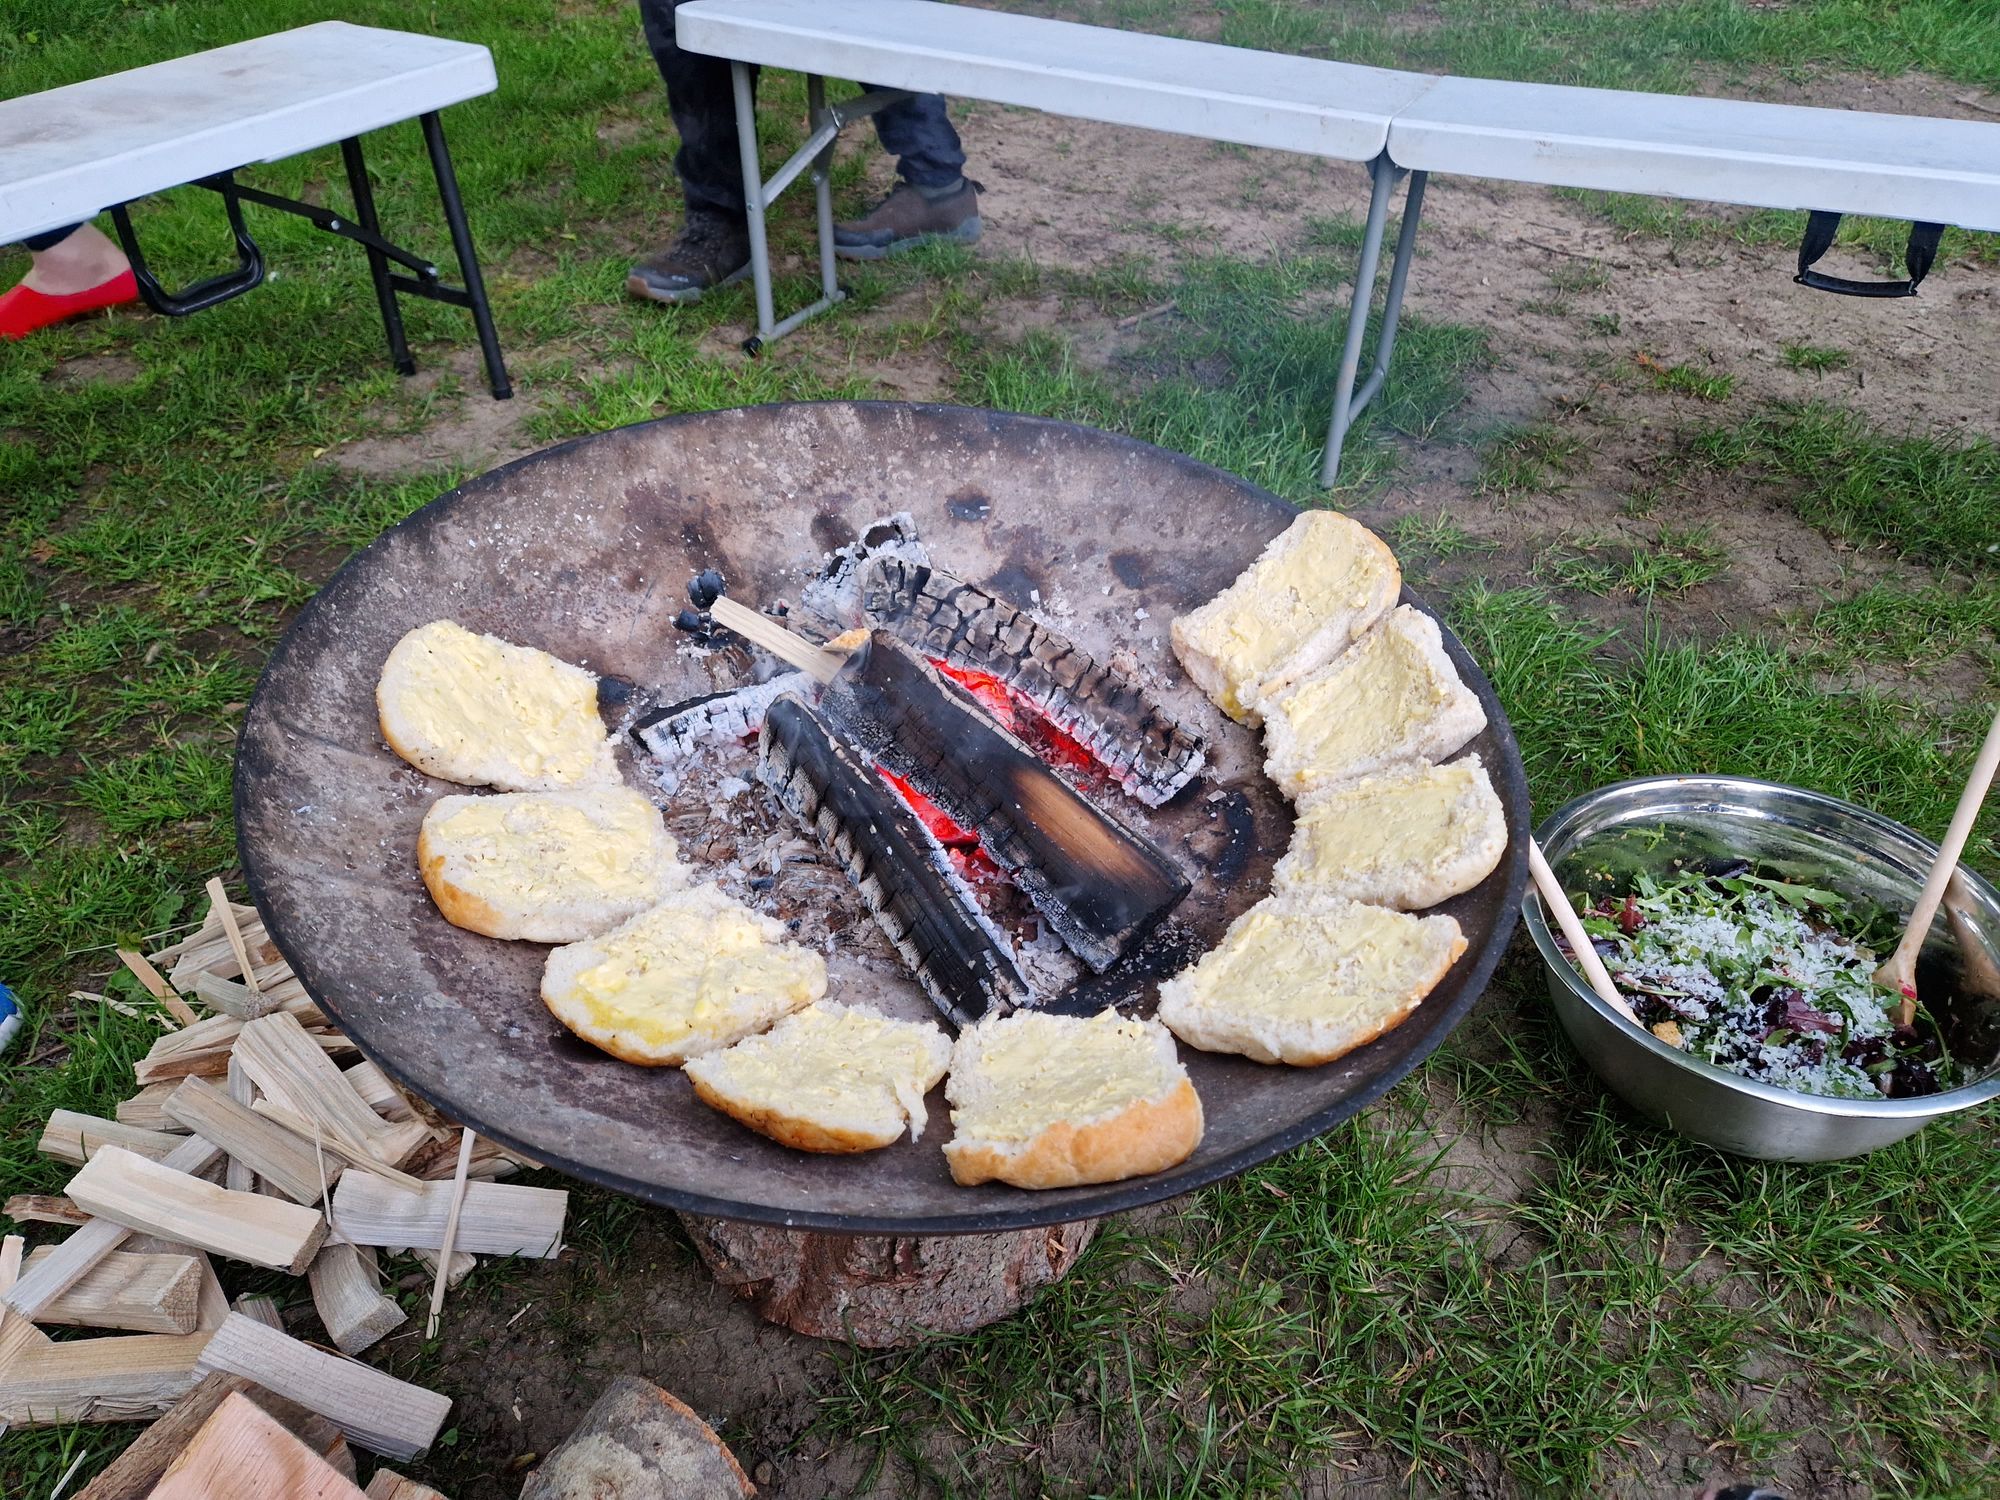 Buttered rolls arranged around the edge of a fire pit.